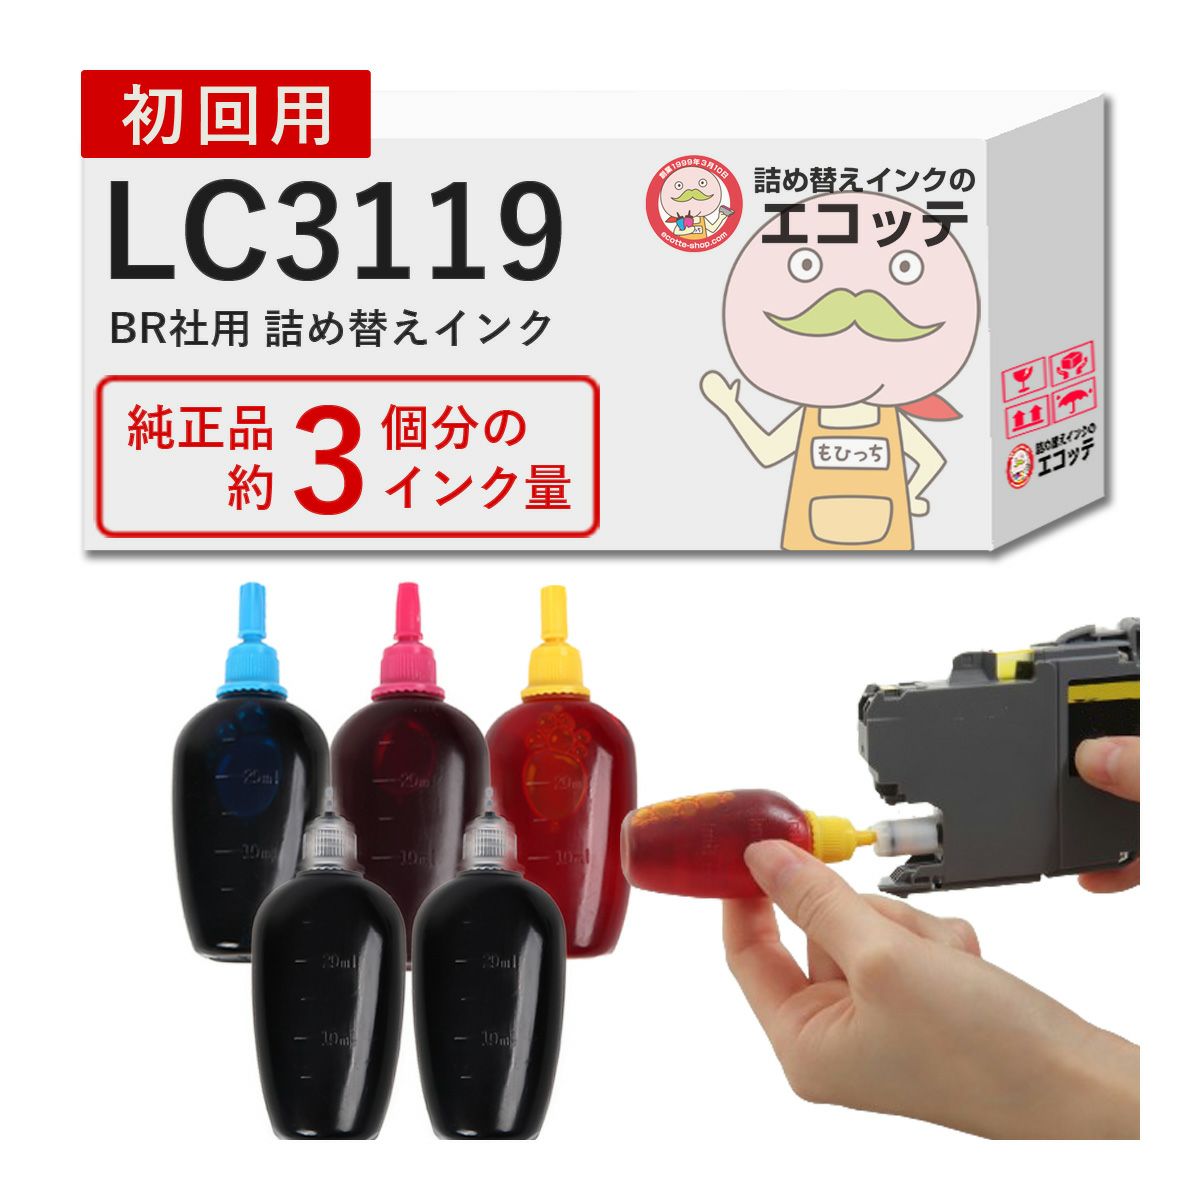 LC3111-4PK LC3111 詰め替えインク